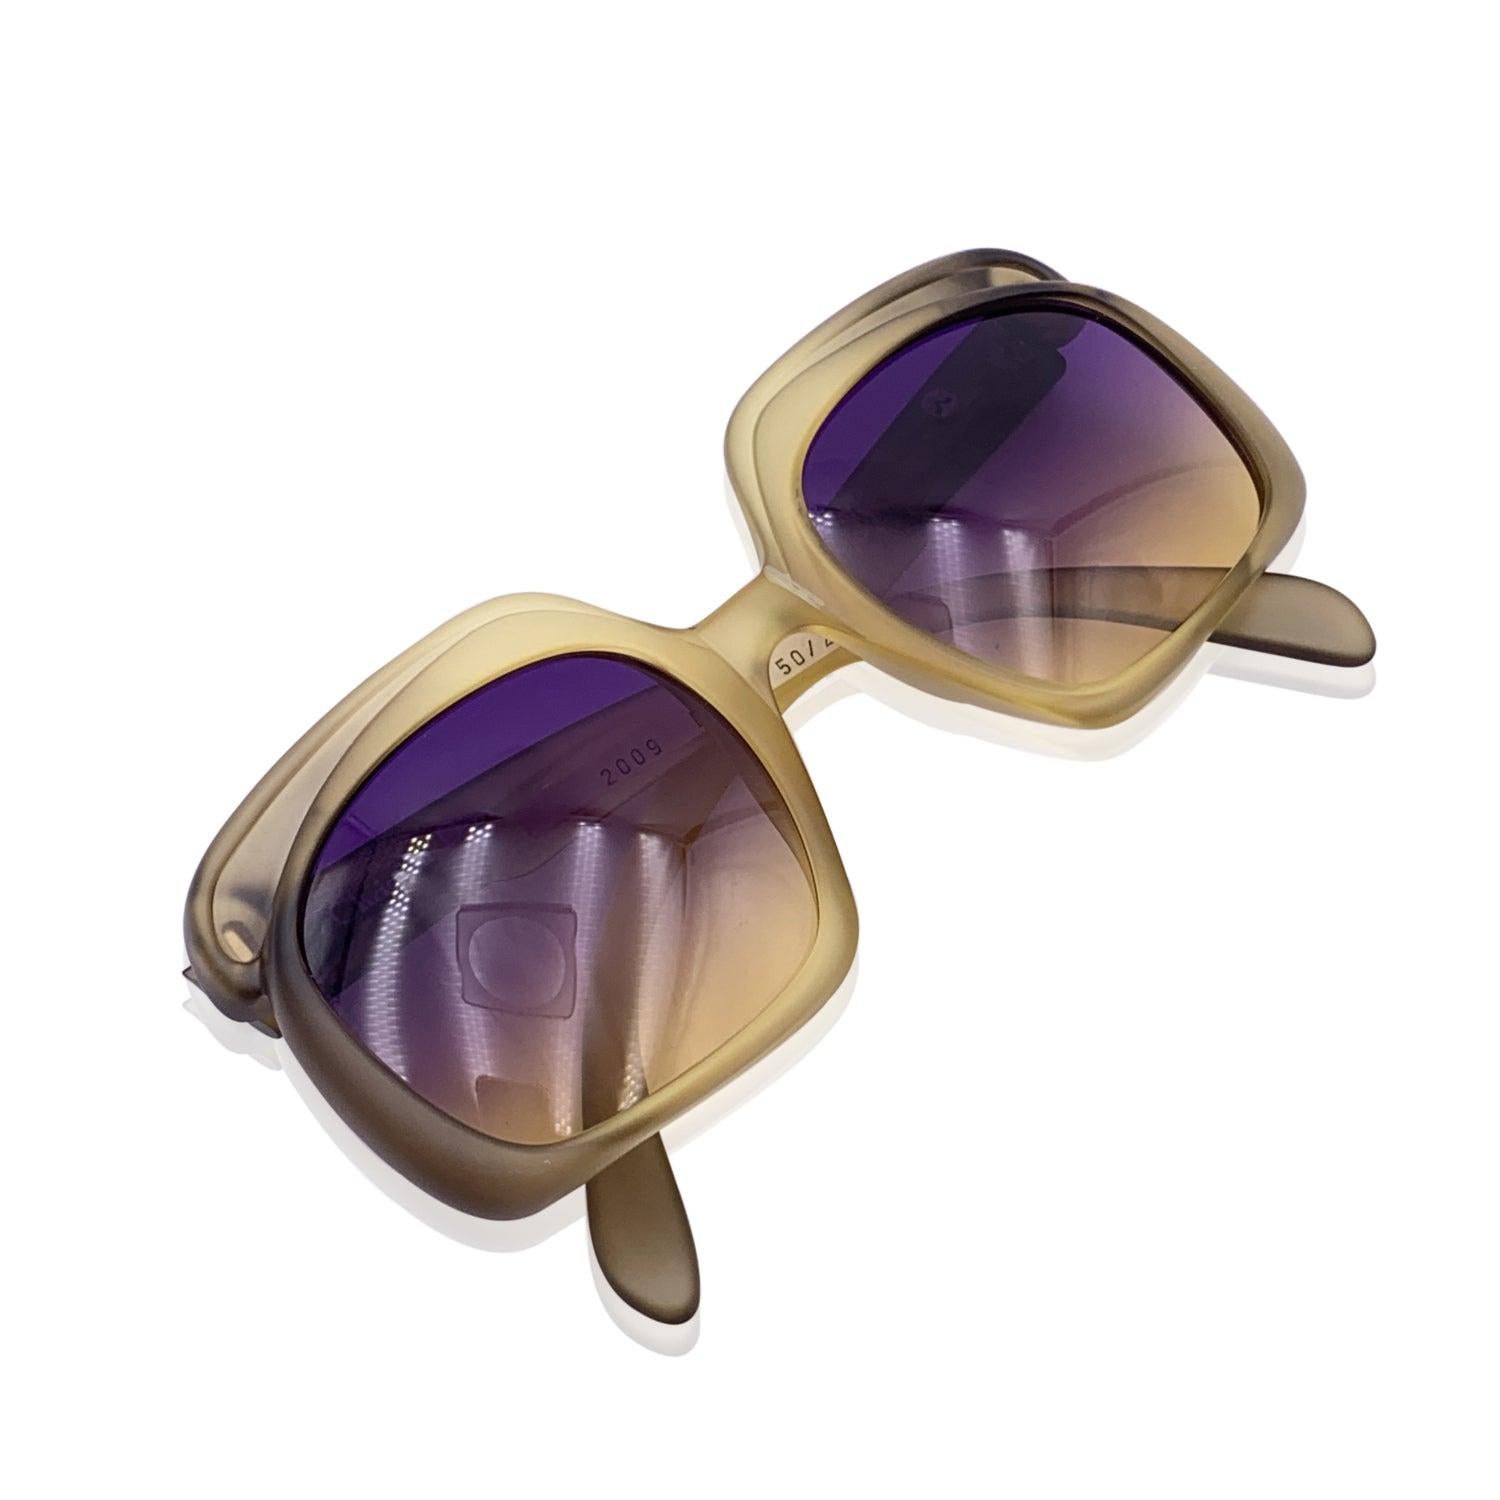 Vintage Christian Dior oversize sunglasses, Mod. 2009- Col 667. Ombre' yellow Optyl frame. Original 100% Total UVA/UVB protection. Gradient bicolor lenses (from Purple to yellow). CD logo on temples. Made in Germany Details MATERIAL: Acetate COLOR: